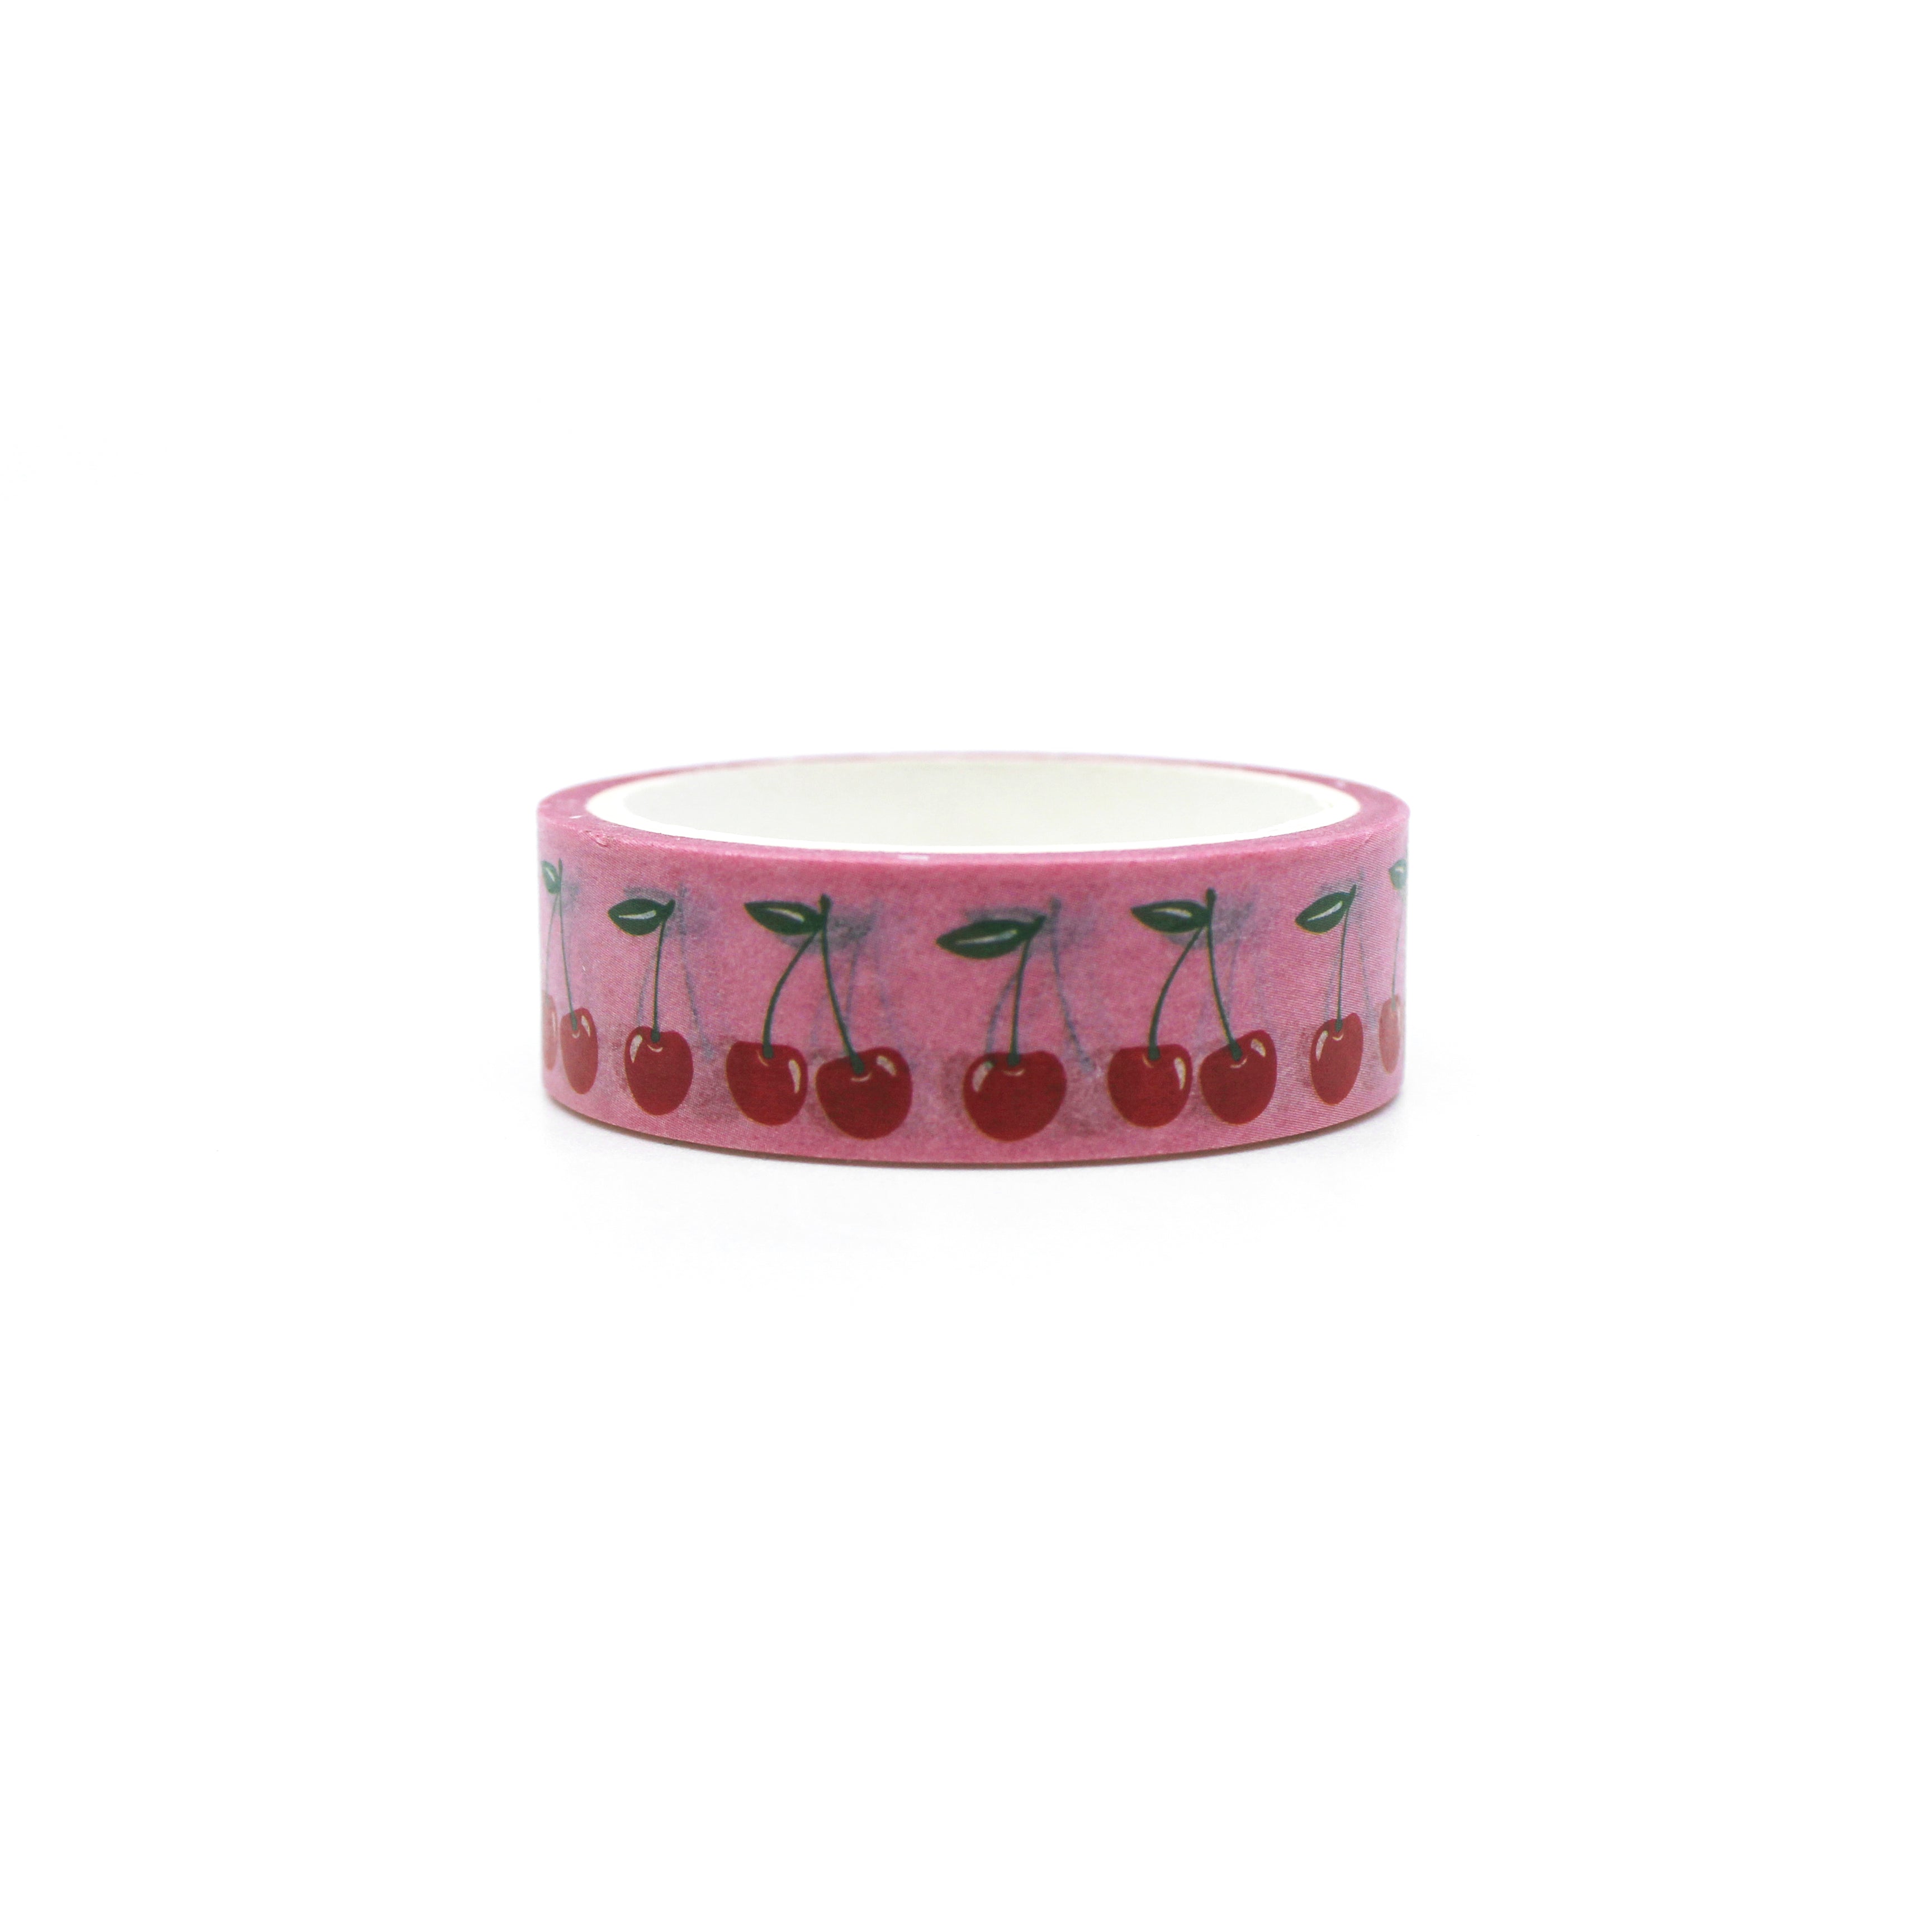 This is a cute cherries washi tape from BBB Supplies Craft Shop